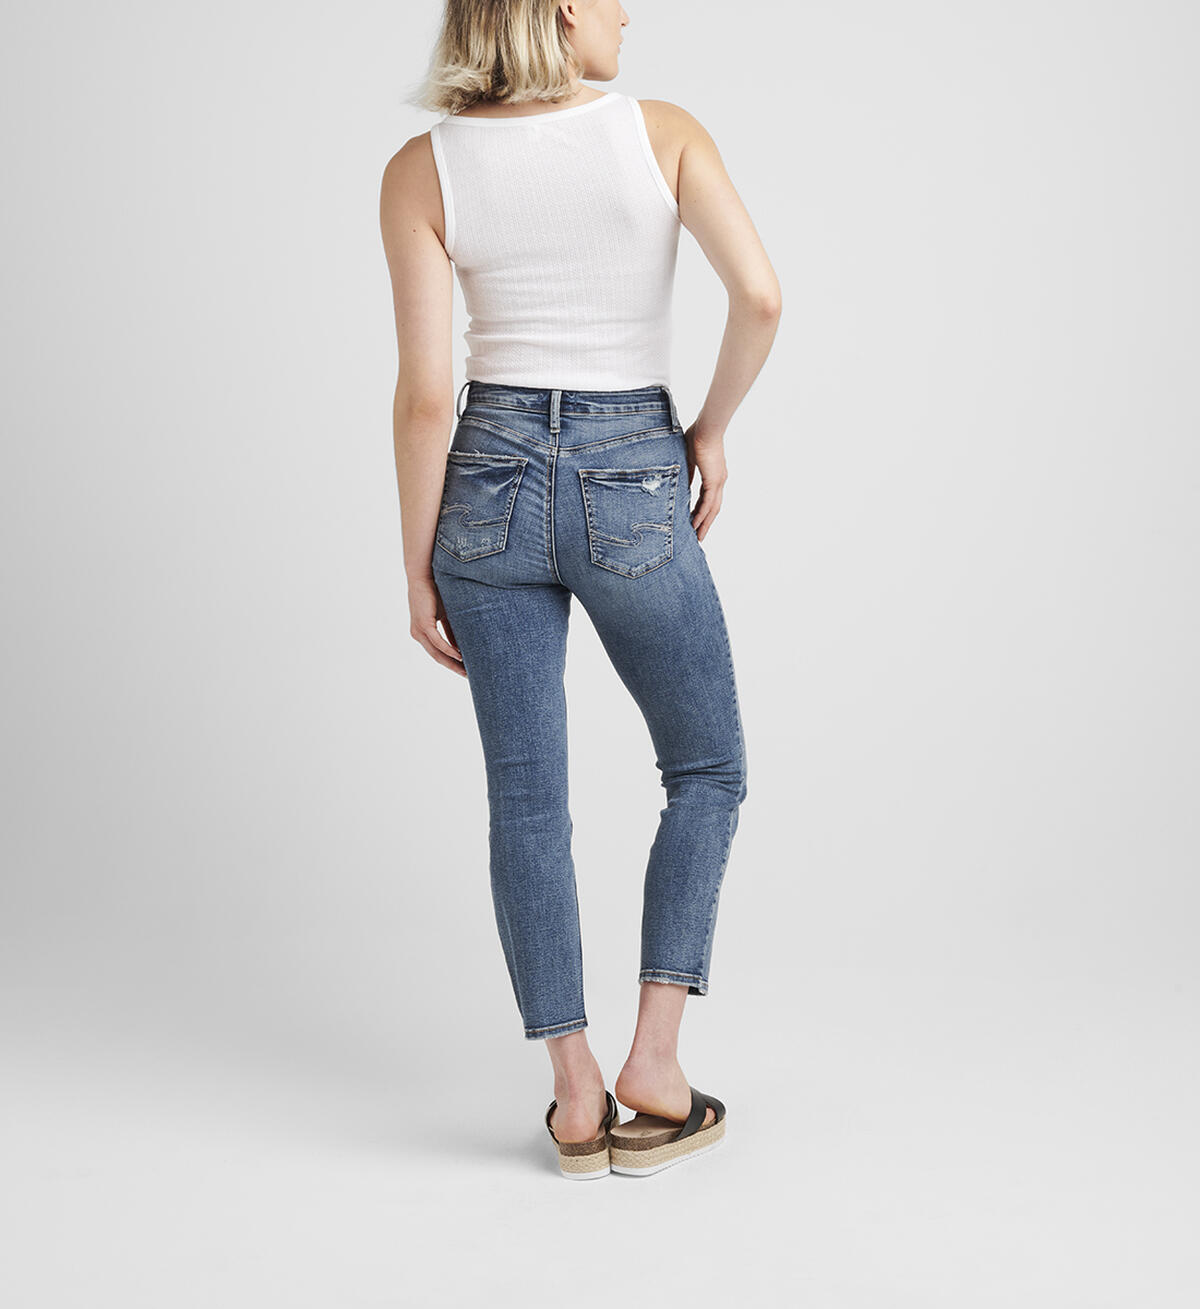 Avery High Rise Straight Crop Jeans, , hi-res image number 1